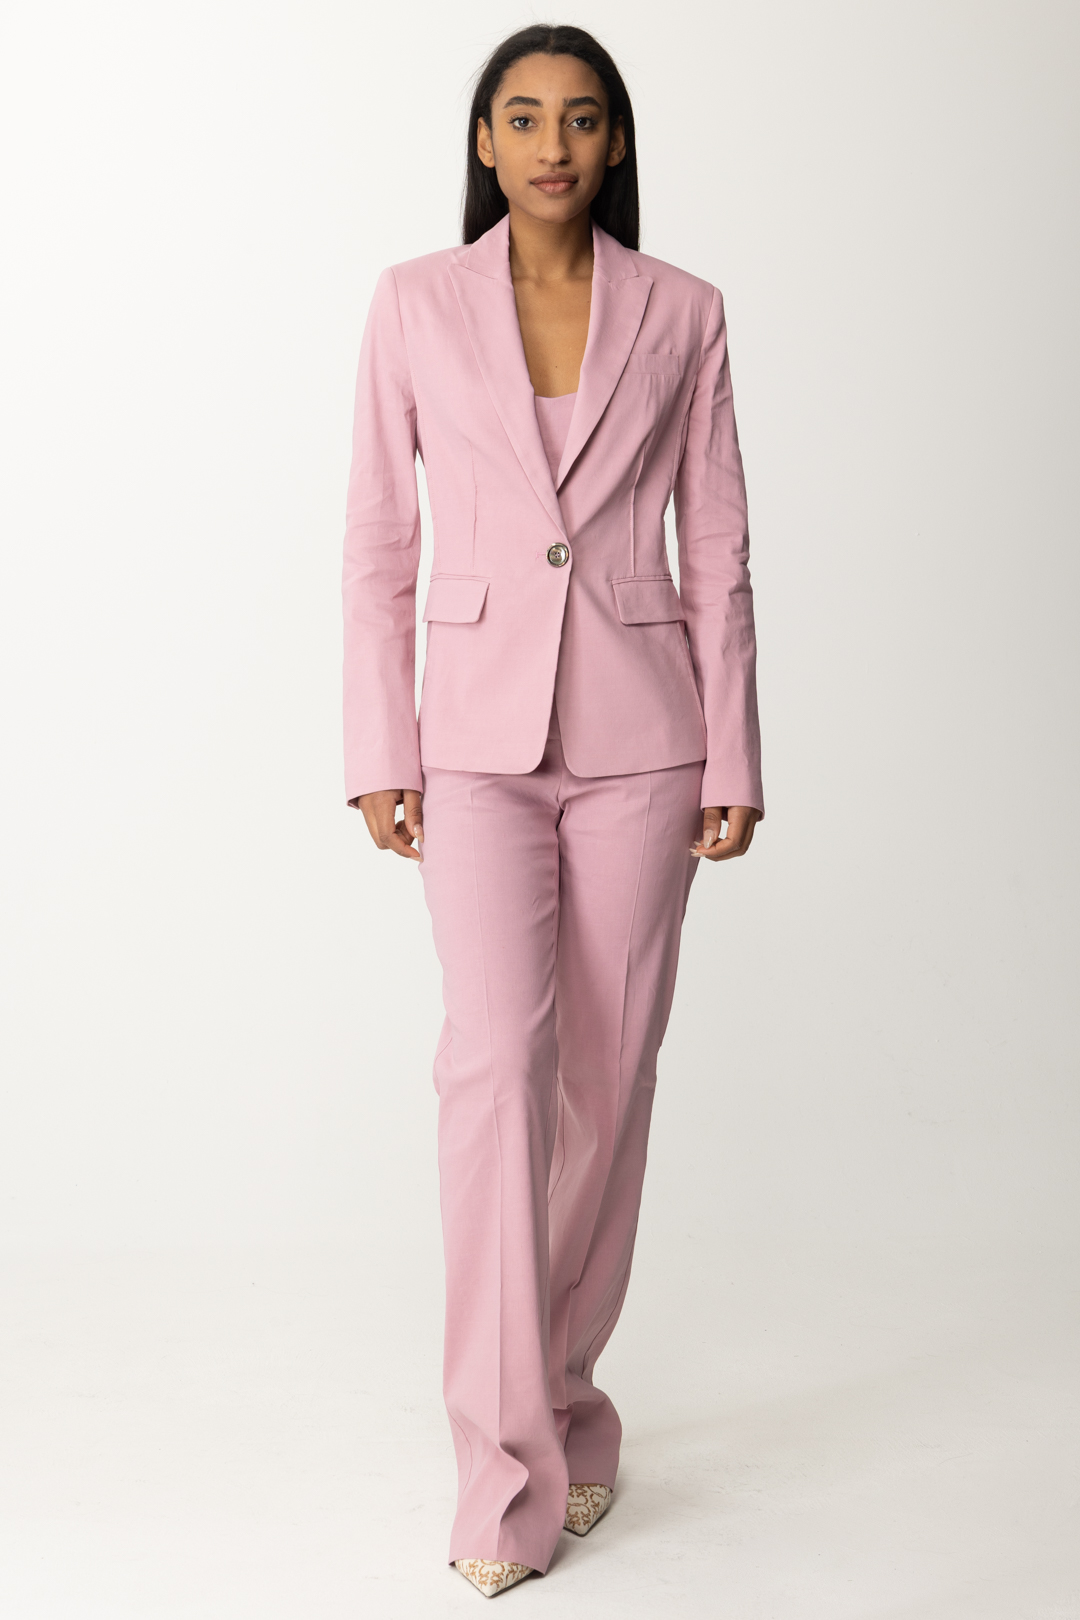 Preview: Pinko Single-Breasted Stretch Linen Jacket FUMO ORCHIDEA